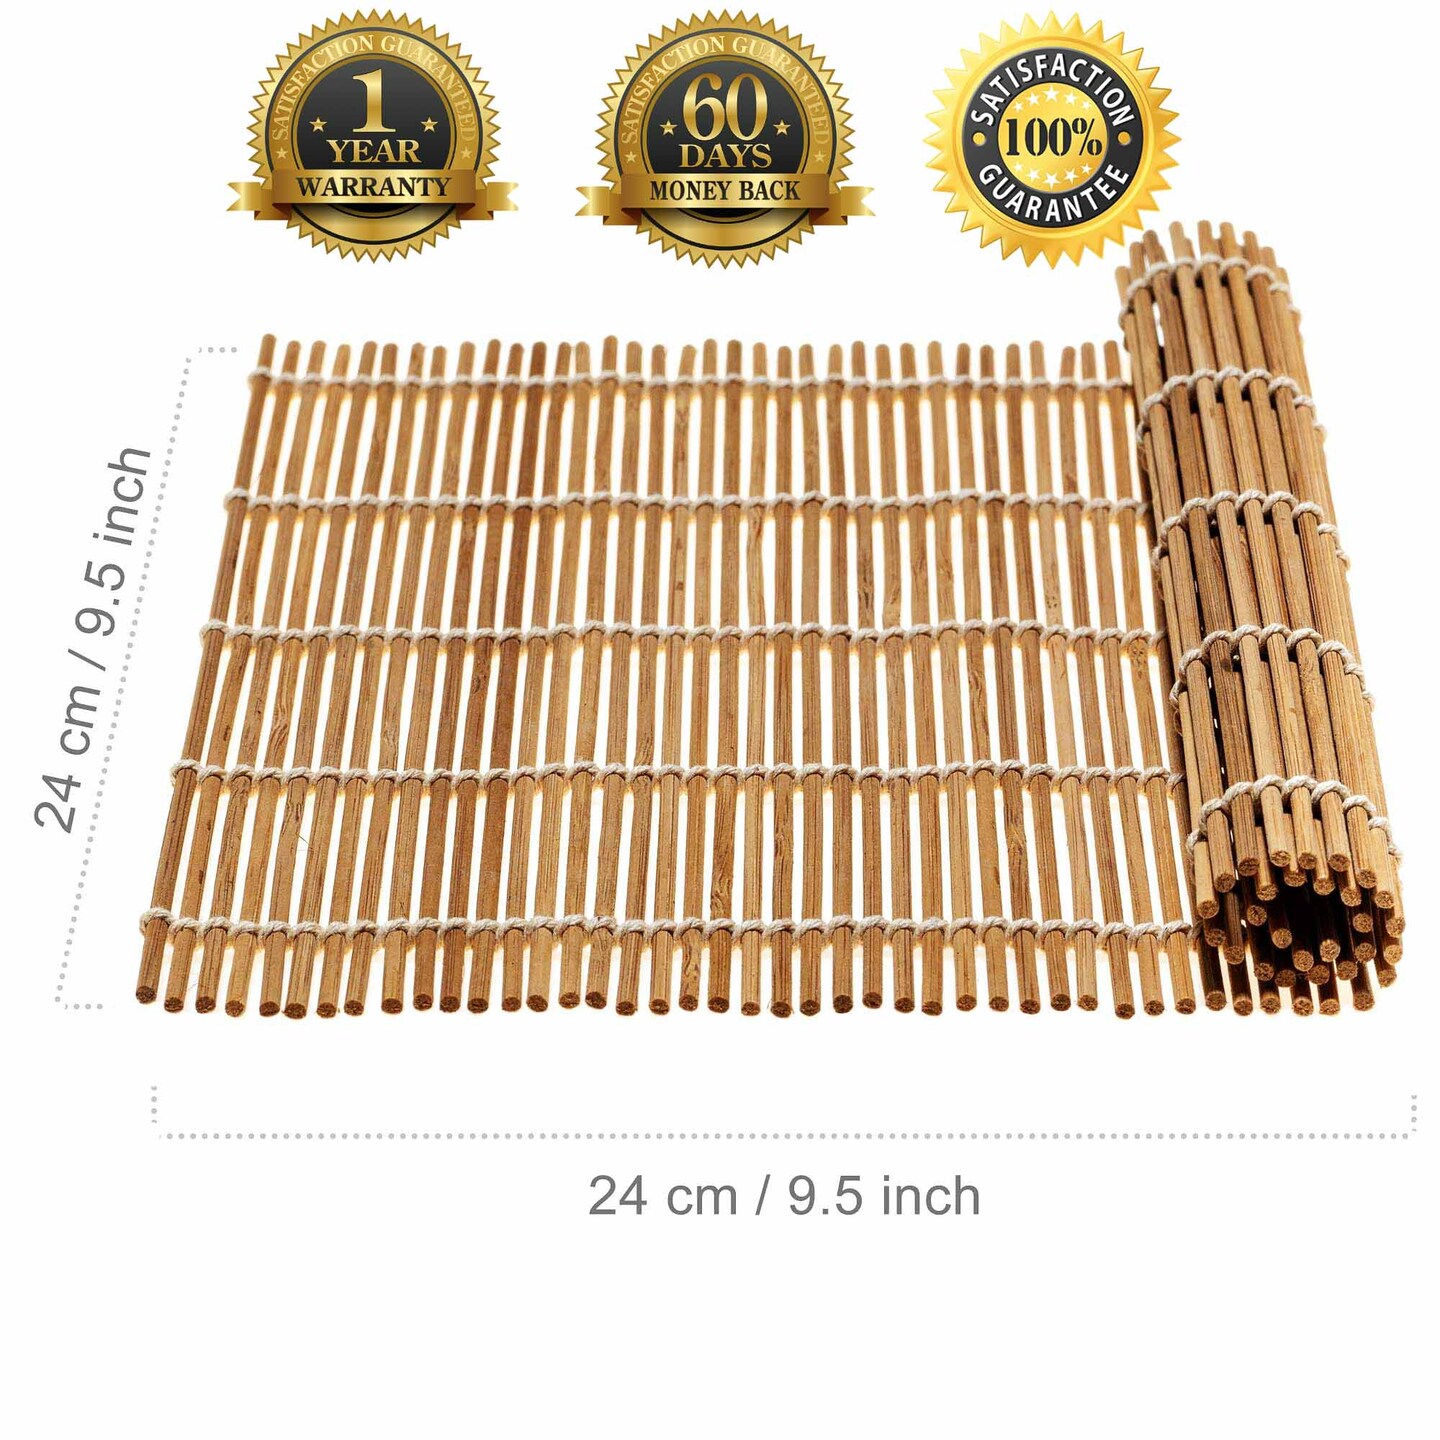 All Natural Bamboo Sushi Rolling Mat 9.5 Inch x 9 Inch